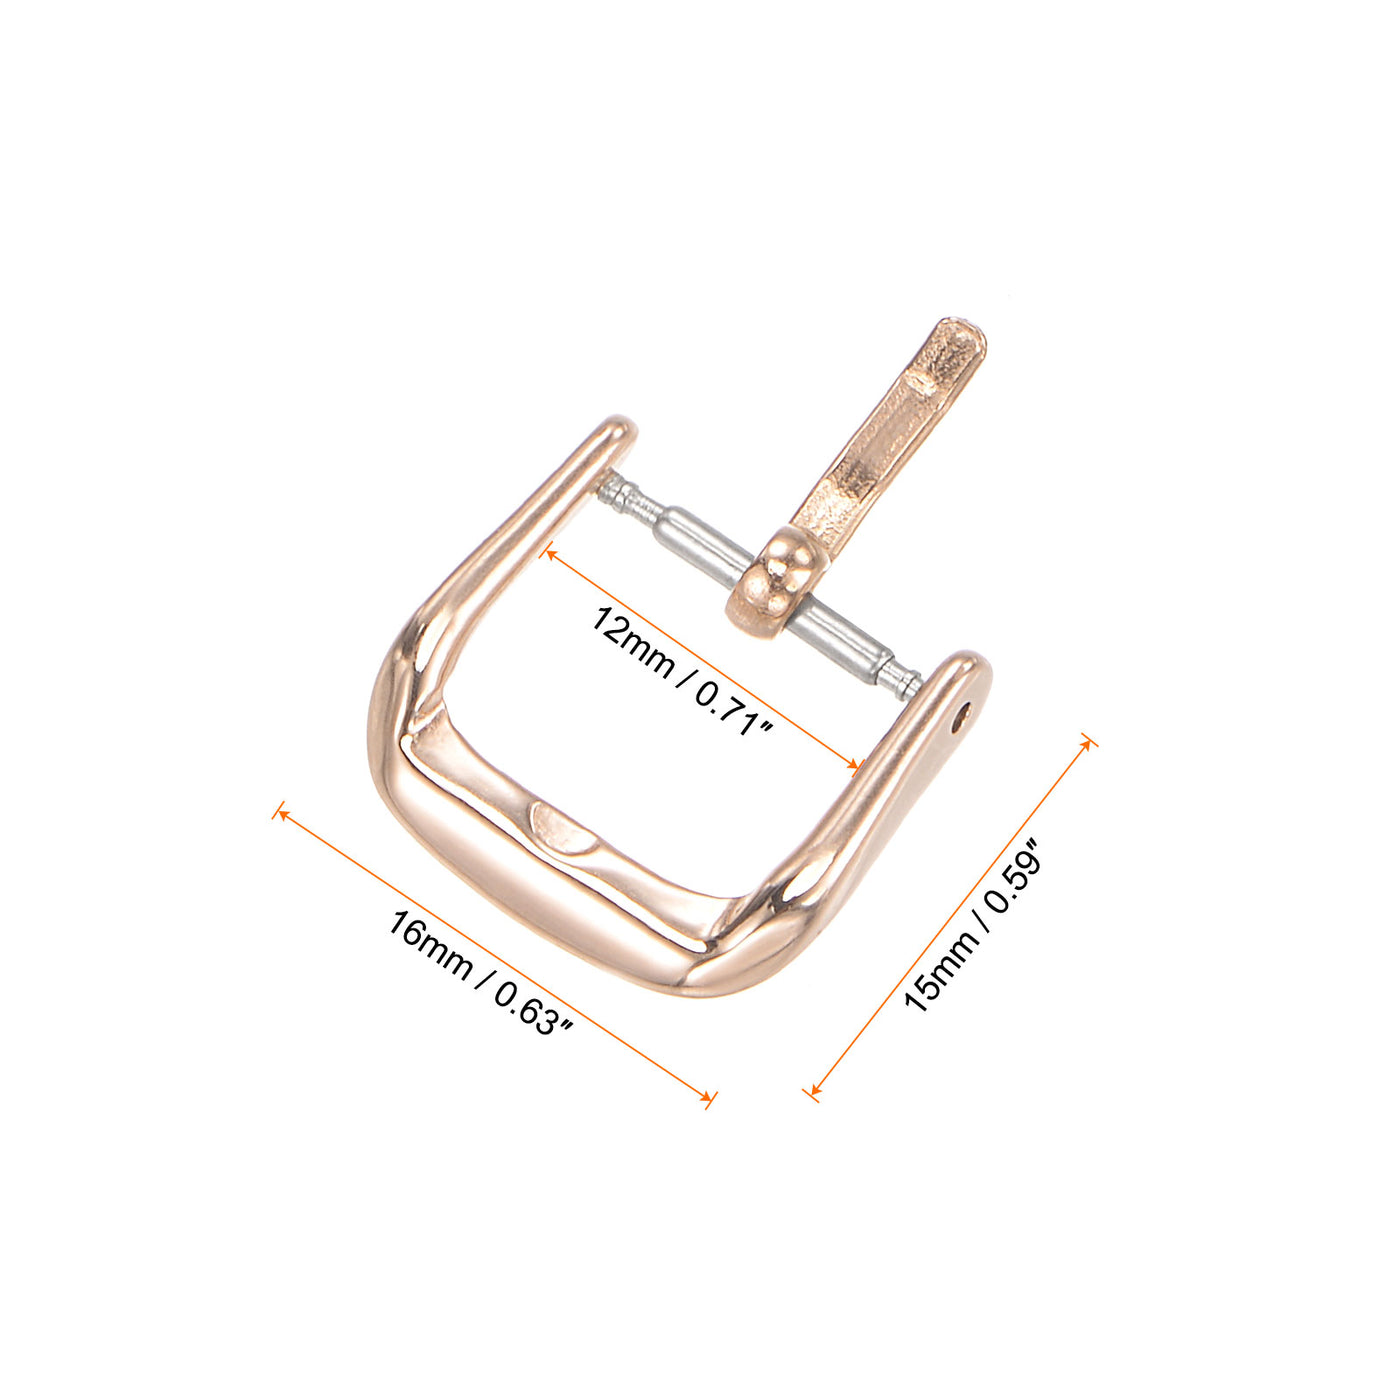 Uxcell Uxcell Watch SUS316 Polished PVD Buckle, Rose Gold Tone for 8mm Width Watch Bands